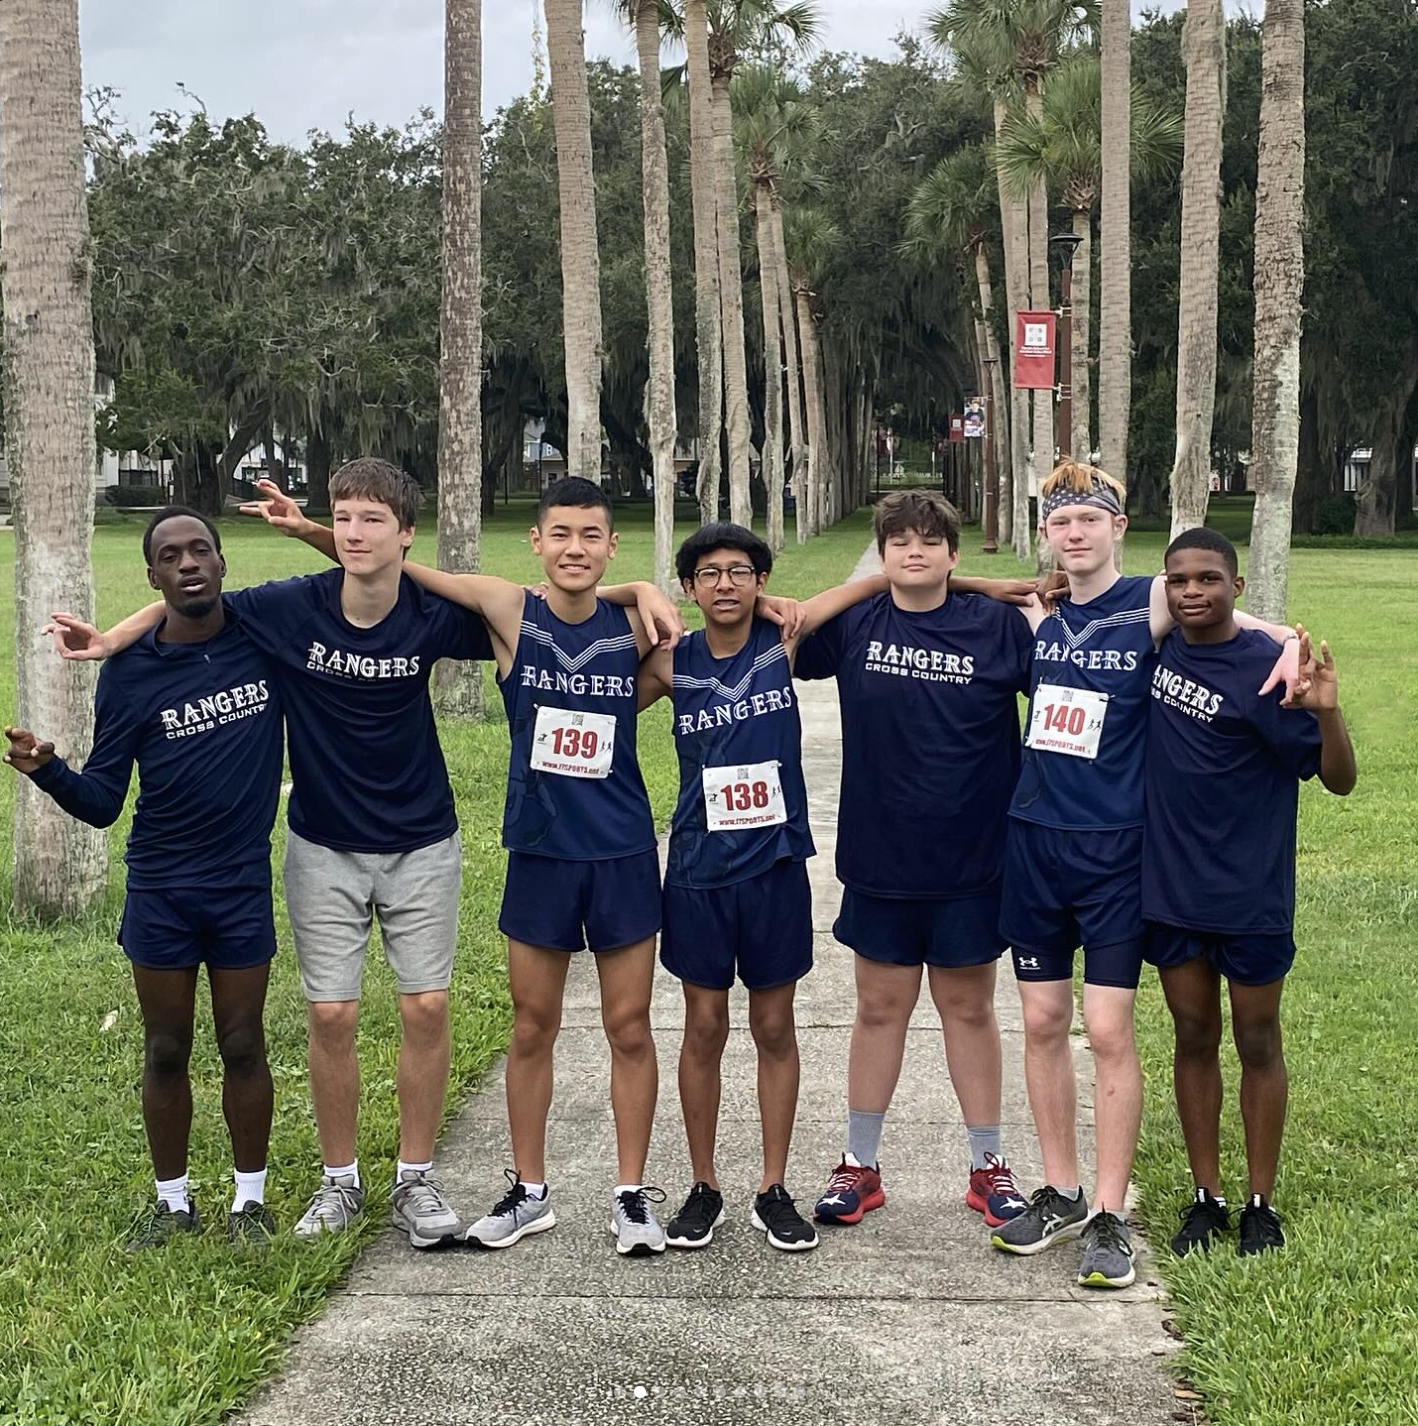 7 cross country athletes posed (some were smiling and some were not) behind two rows of palm trees and grass backgrounds. The athletics wore cross country numbered uniforms with words, “Rangers Cross Country” (navy blue and white).